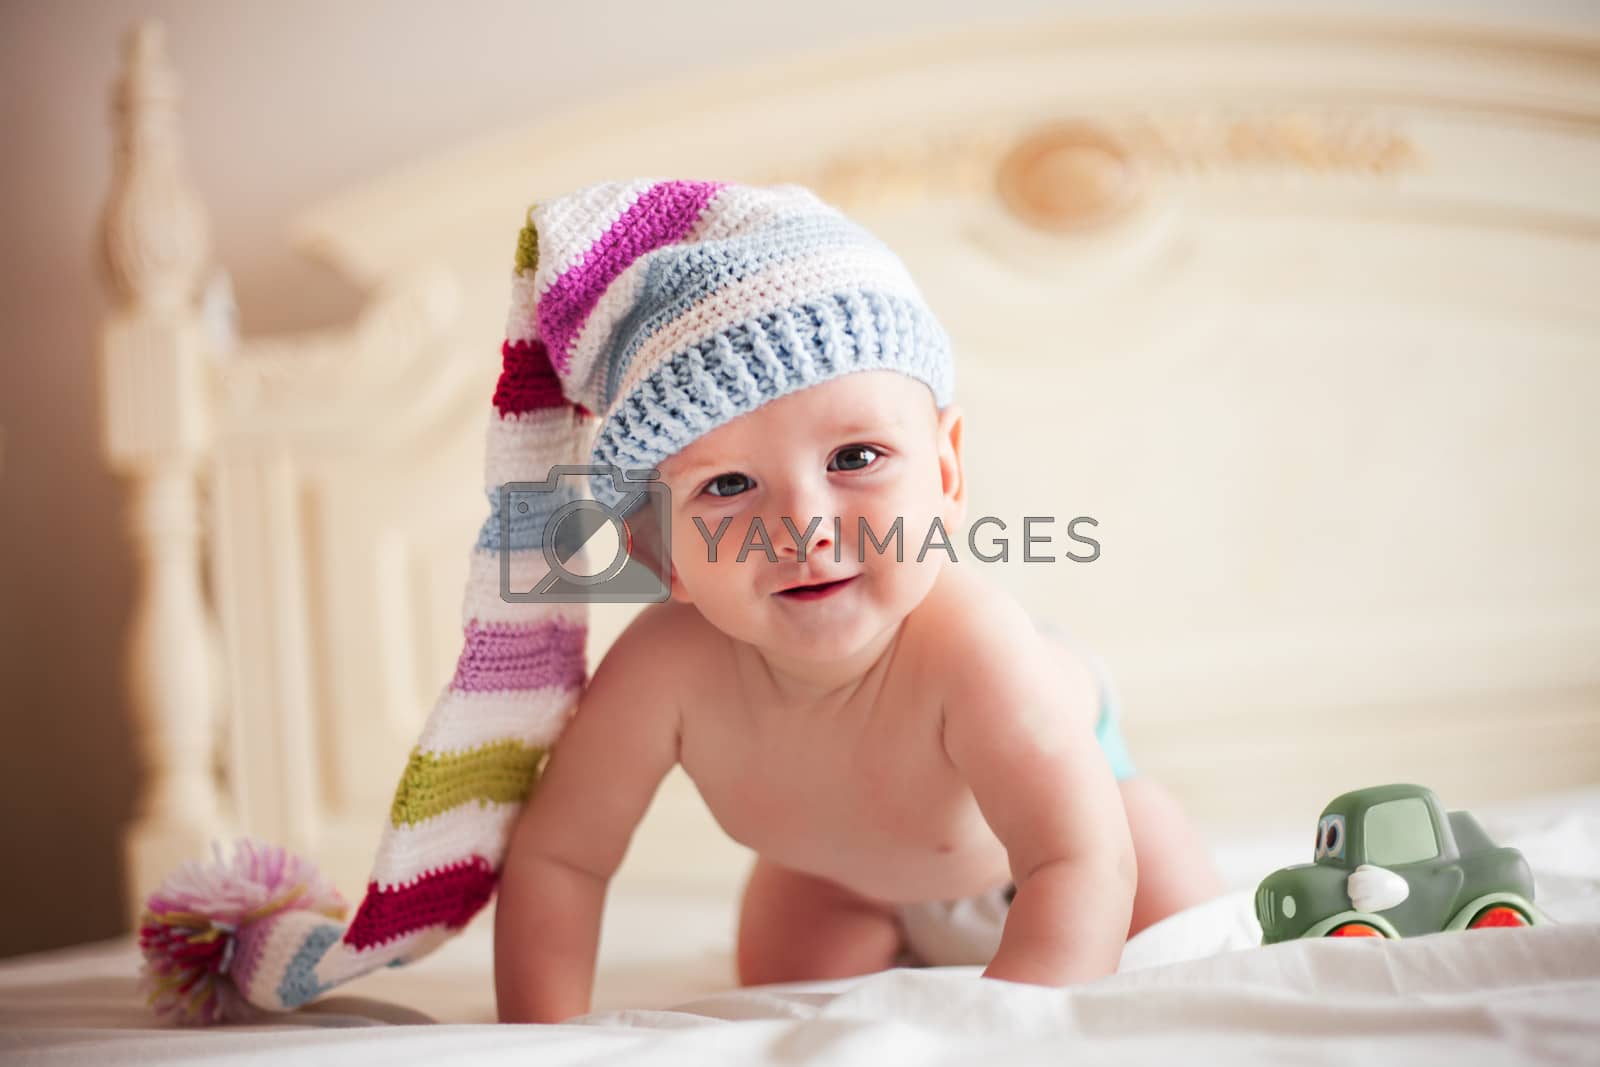 Royalty free image of Baby in crochet hat  by oksix